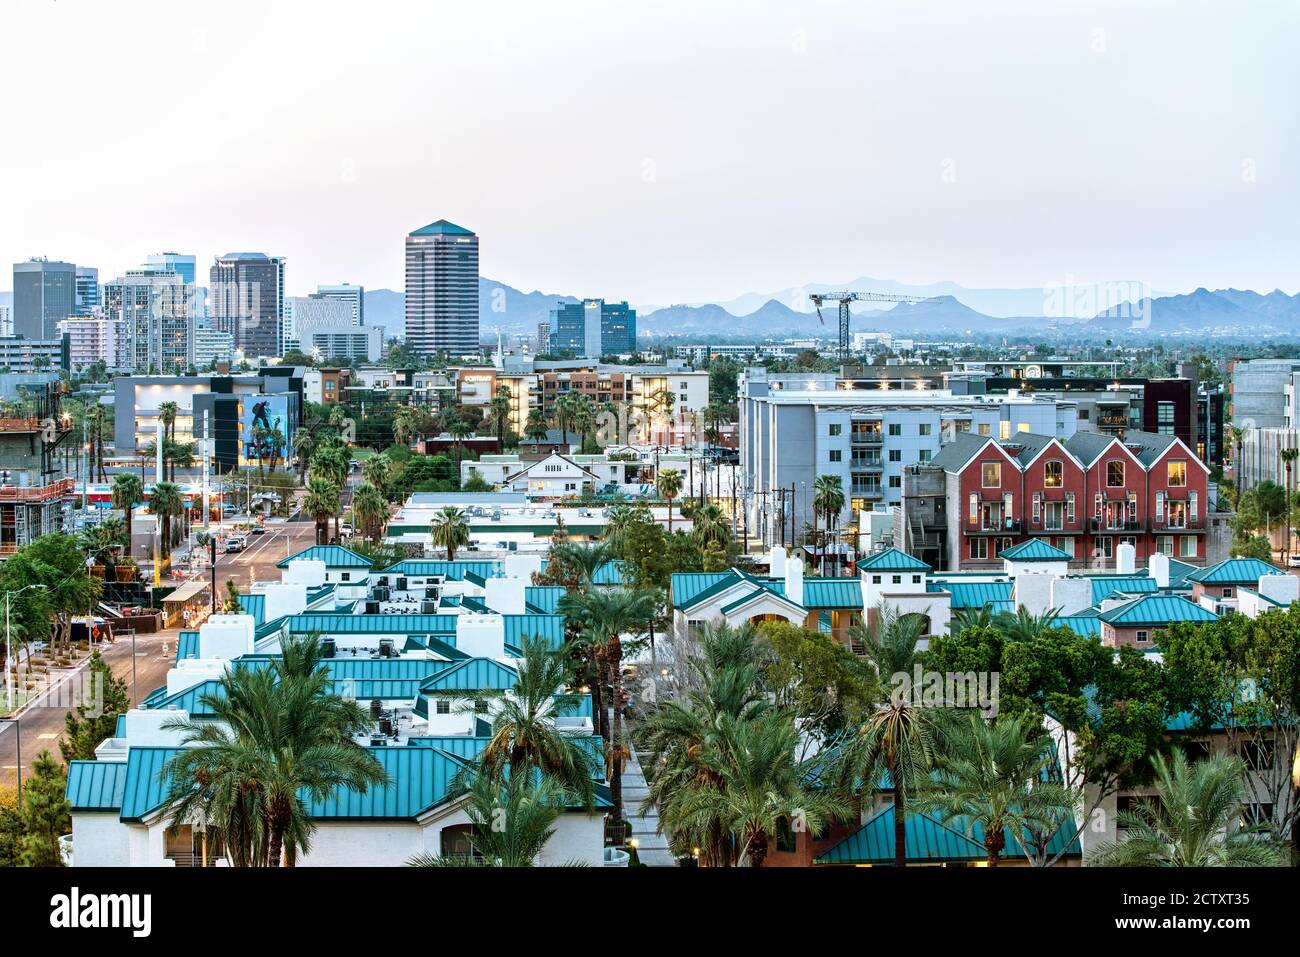 Late afternoon in downtown Phoenix, Arizona Stock Photo